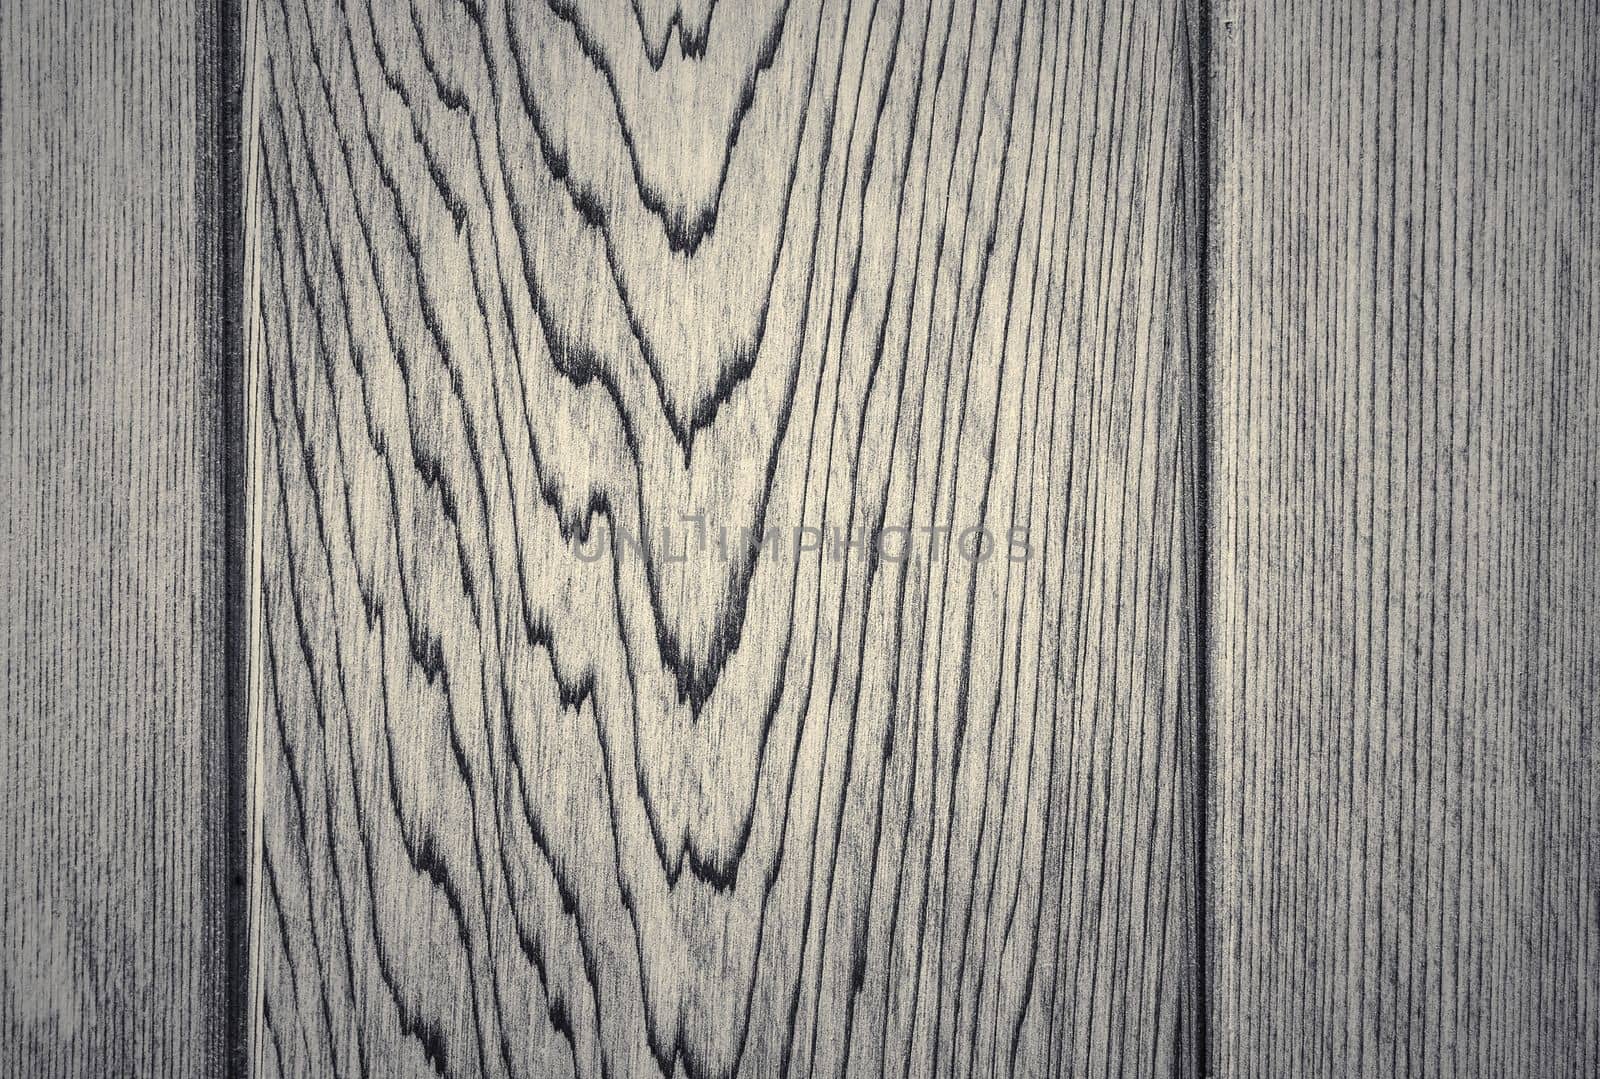 Wooden surface showing planks and grain textures in high resolution. by MP_foto71